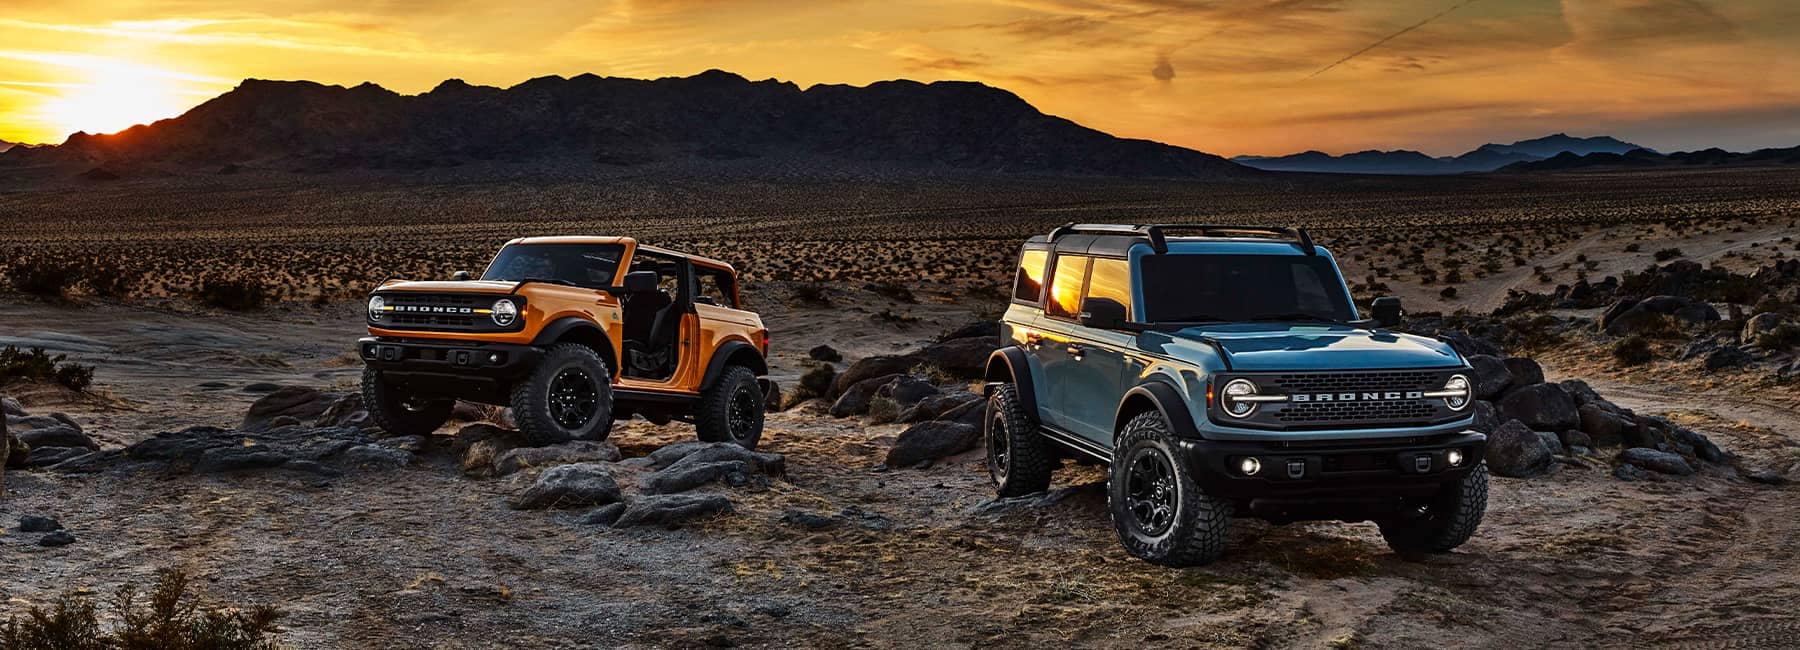 Two 2021 Ford Broncos in the desert at sunset